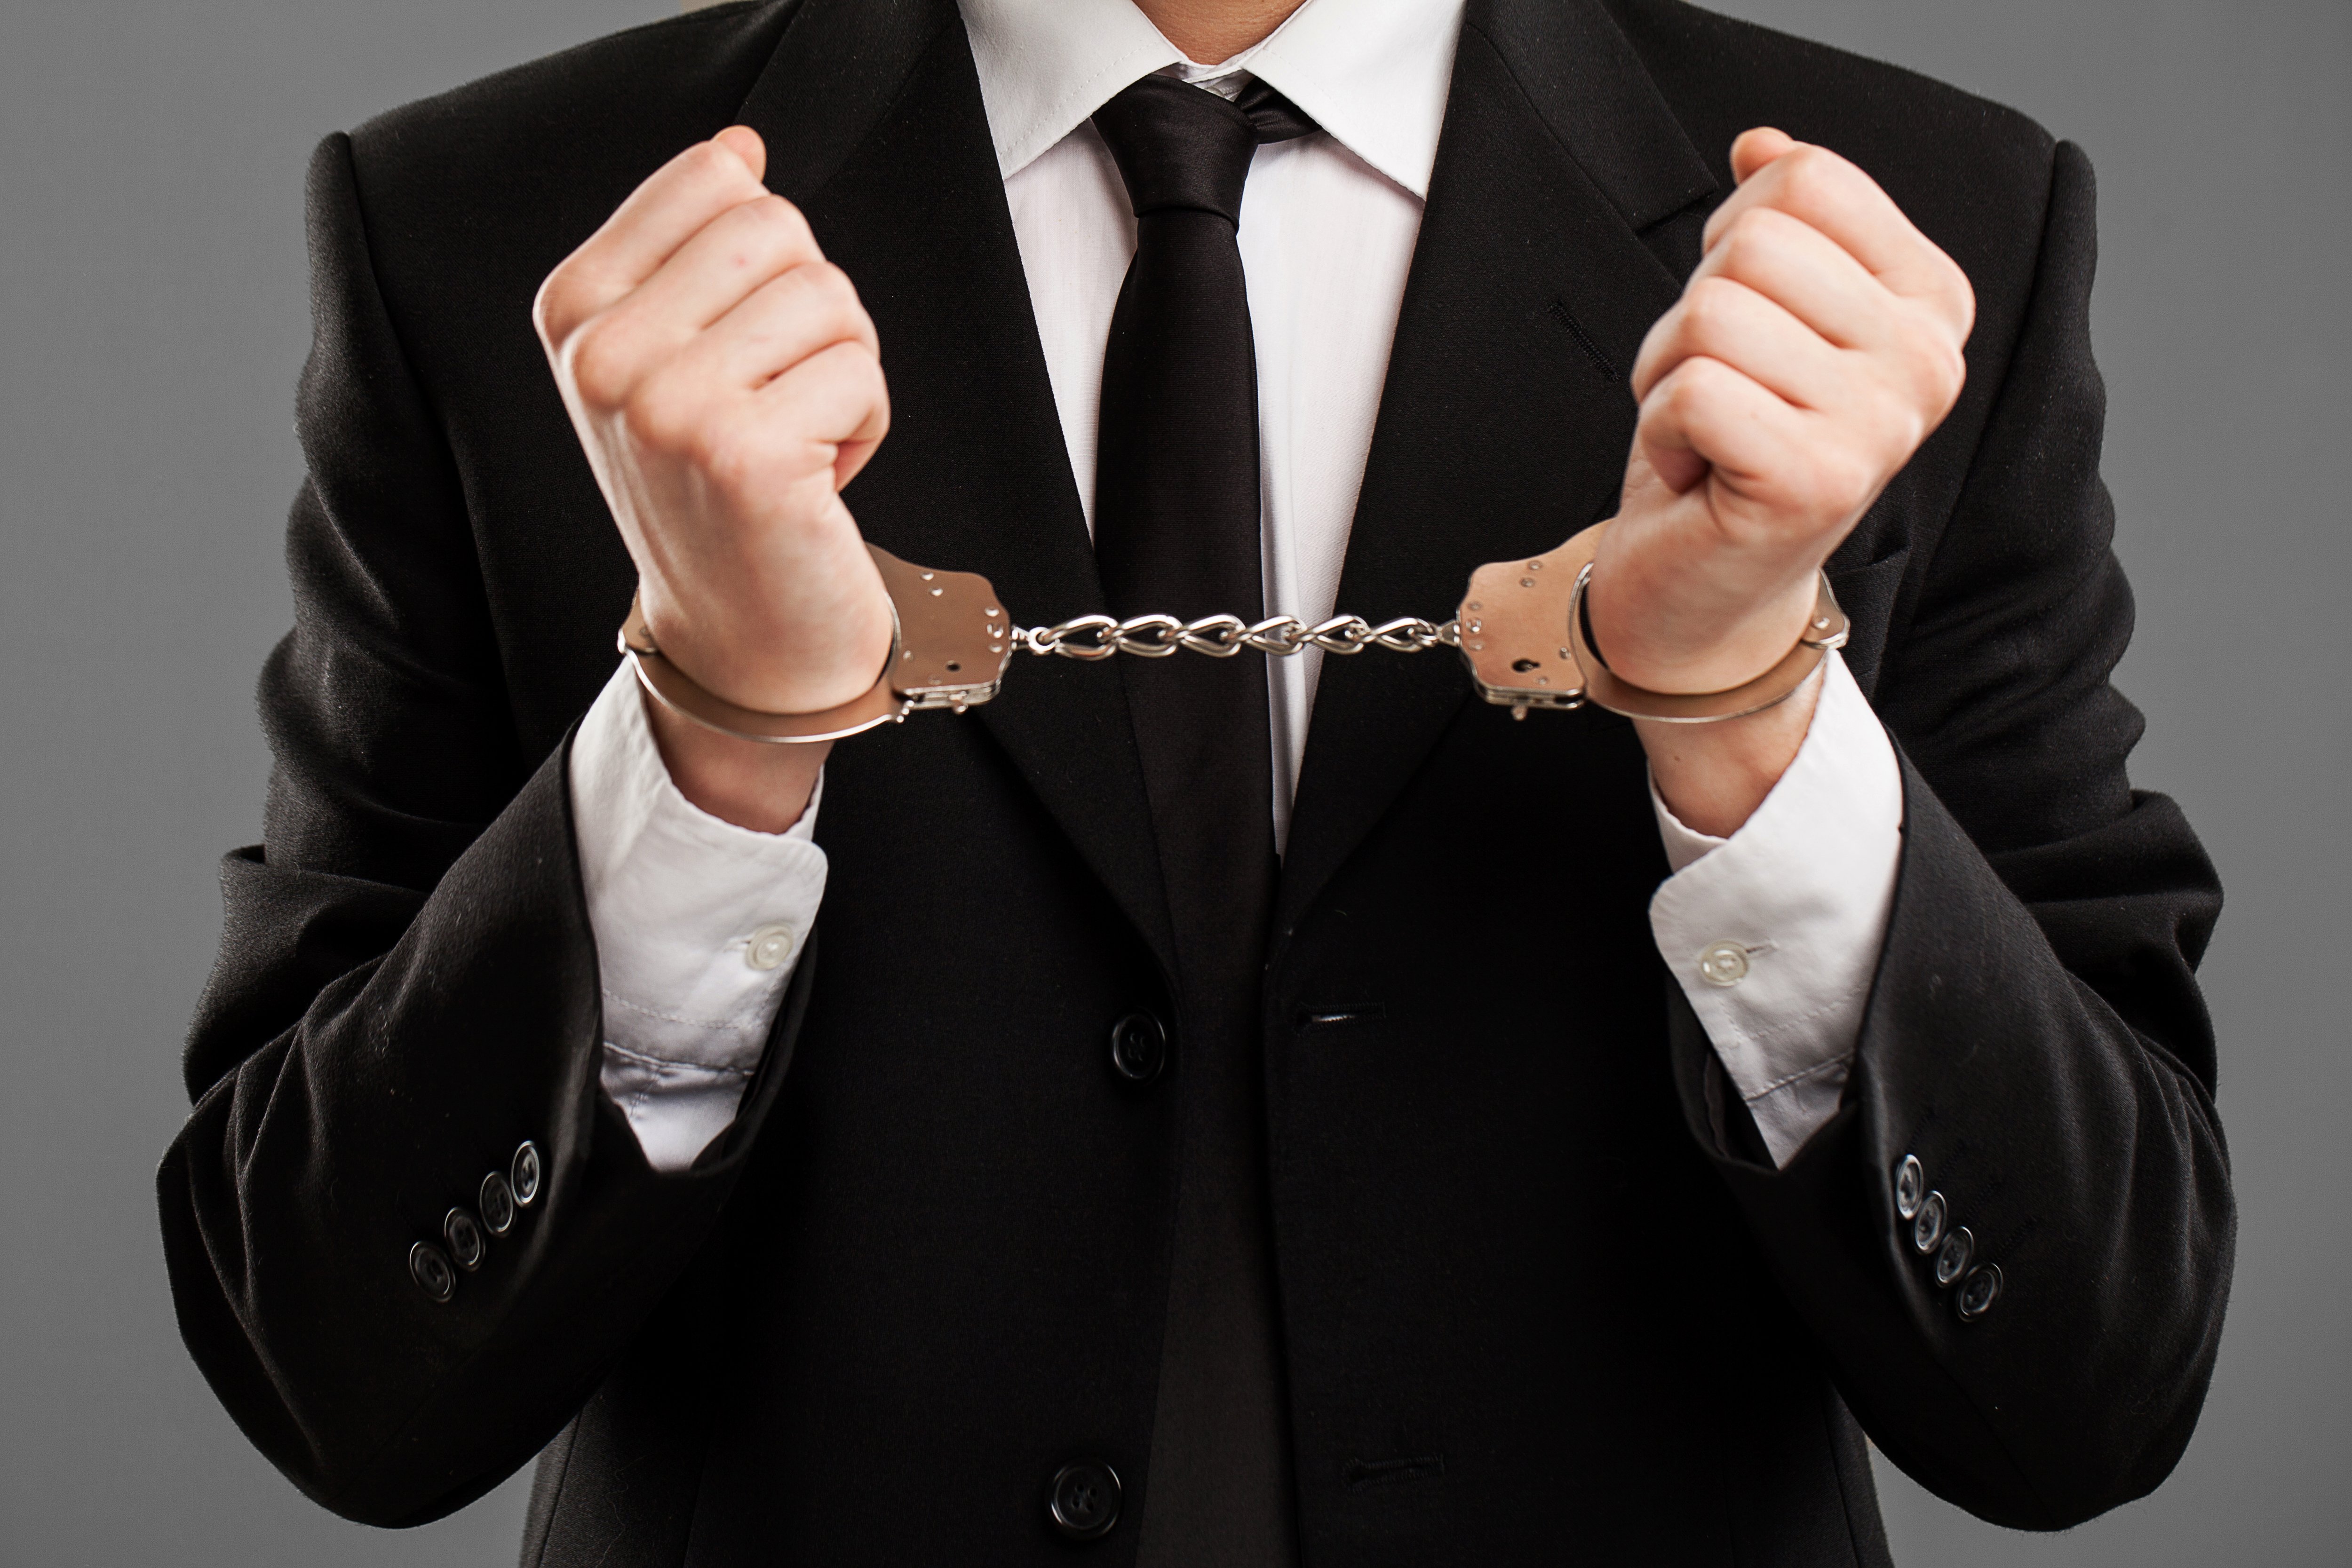 businessman-with-manacles-on-his-hands